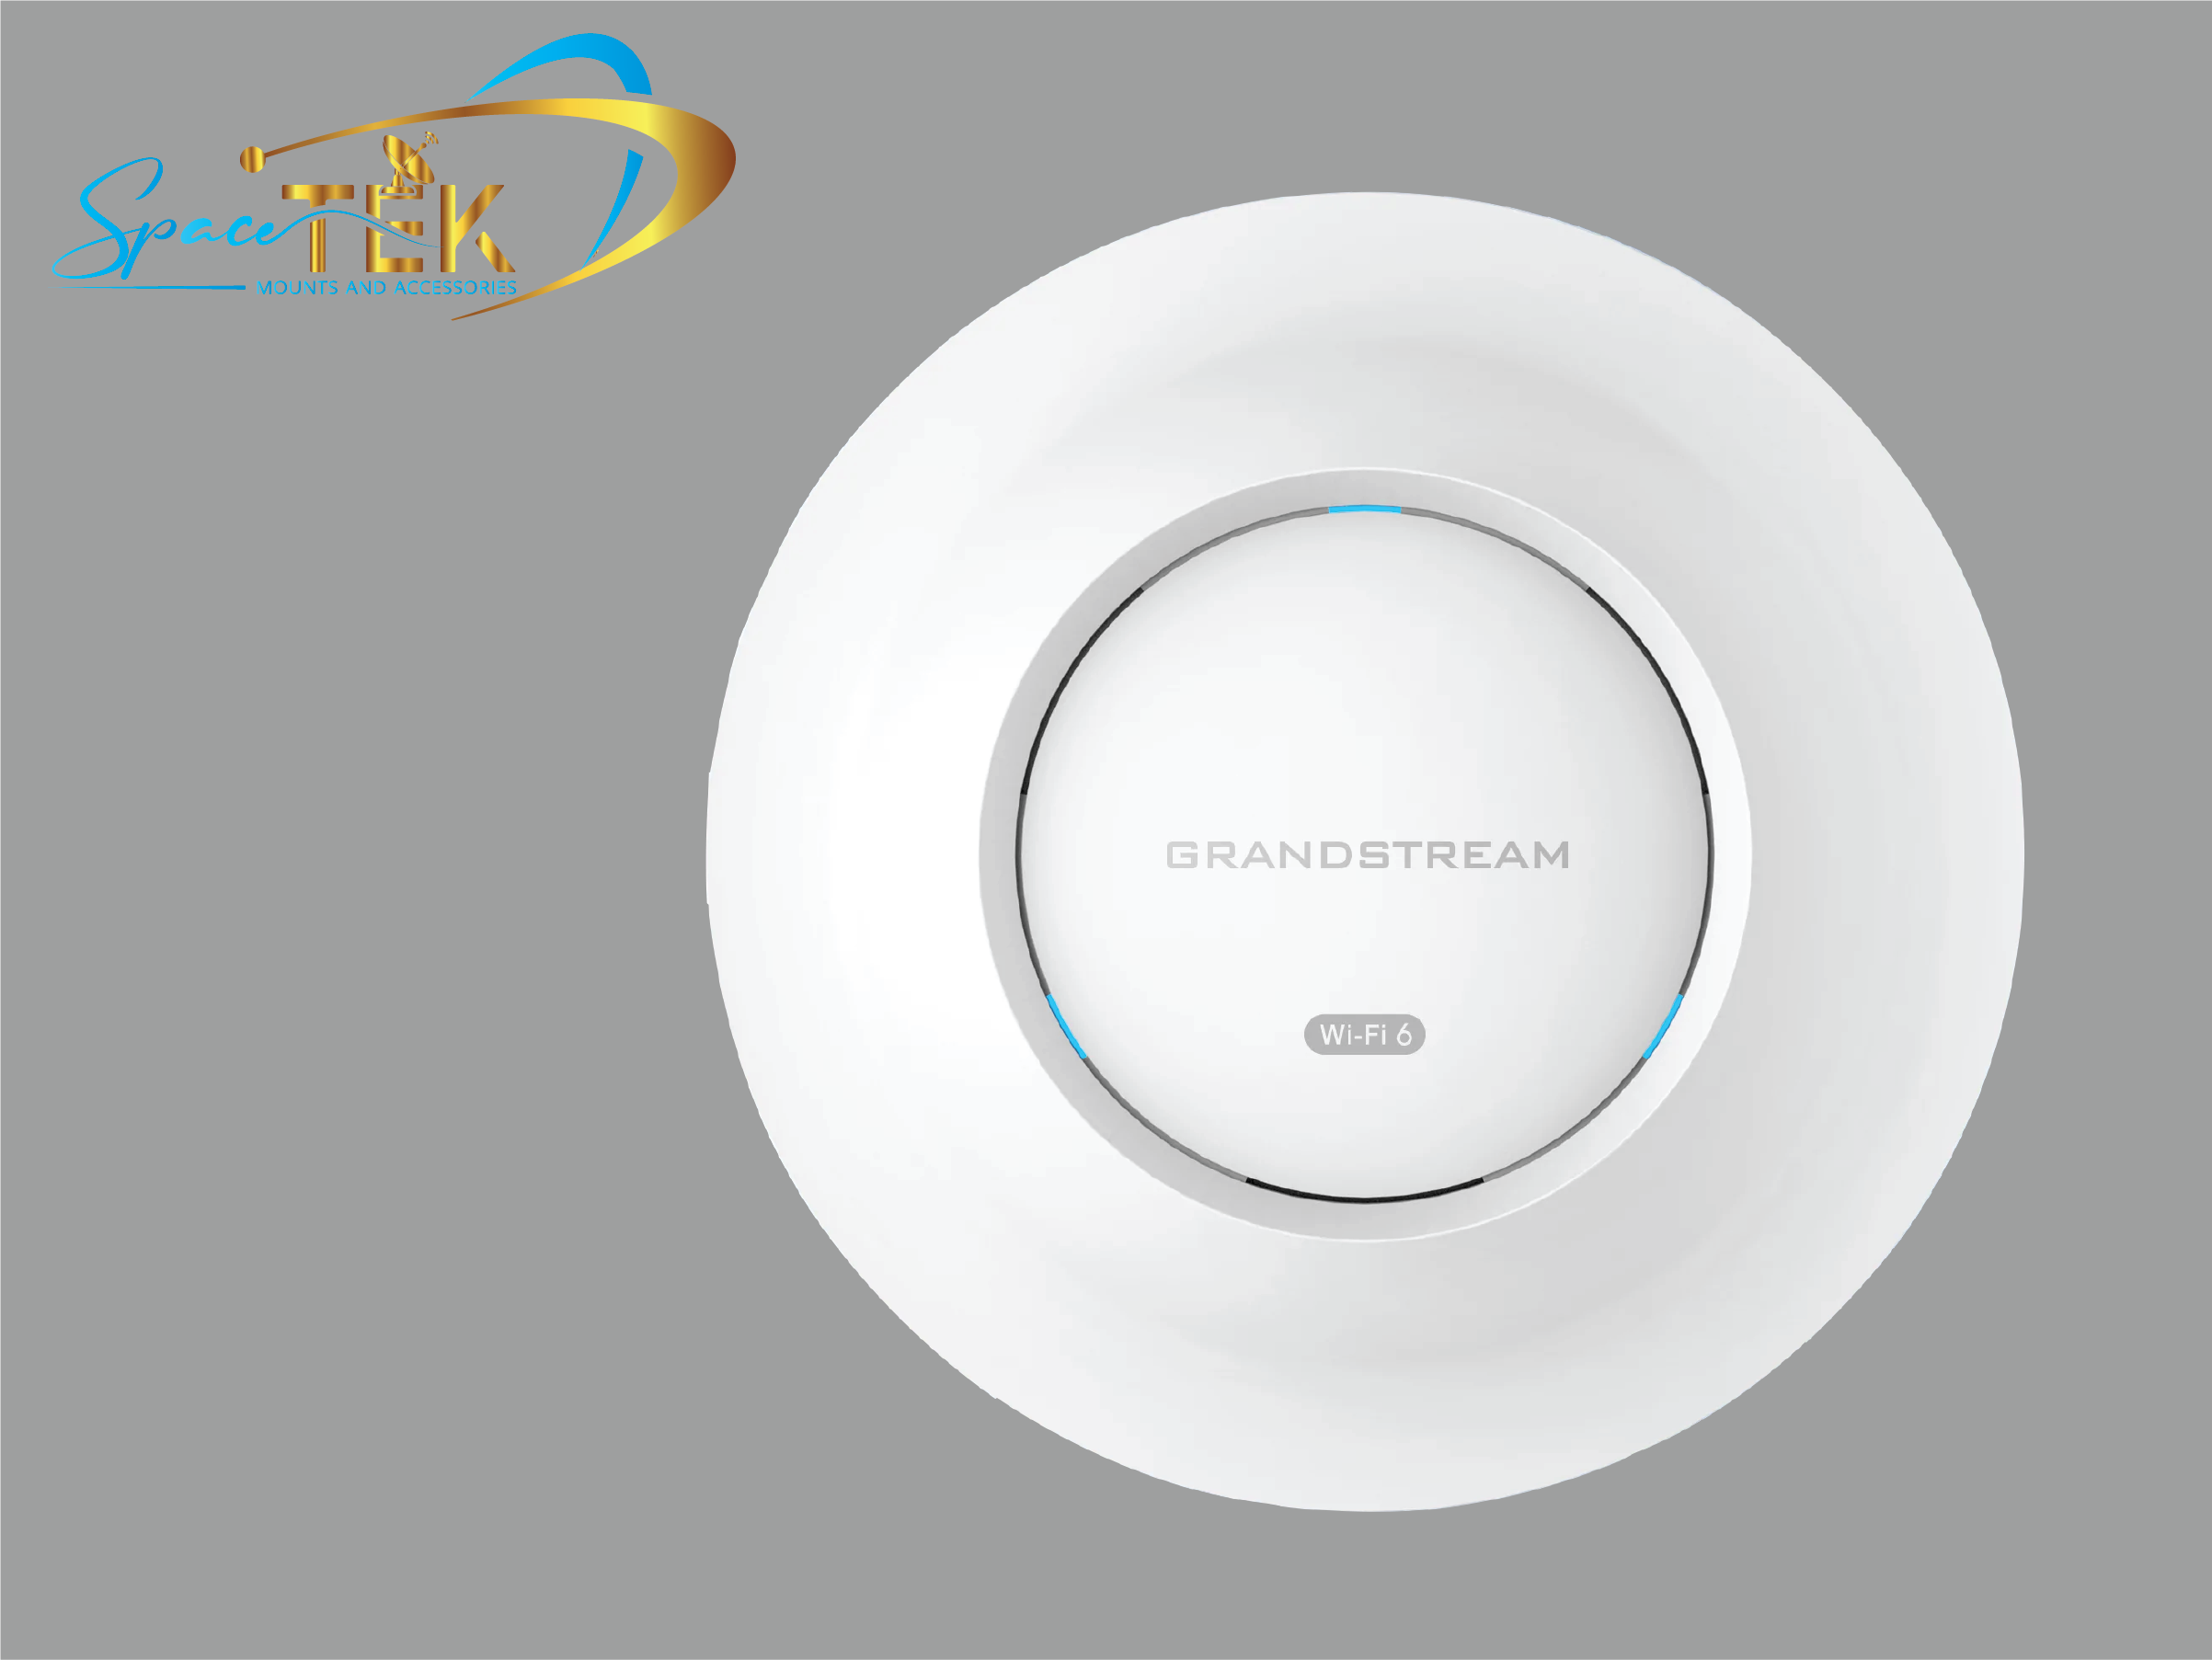 Starlink Compatible - High-performance 4x4:4 Wi-Fi 6 Indoor Access Point